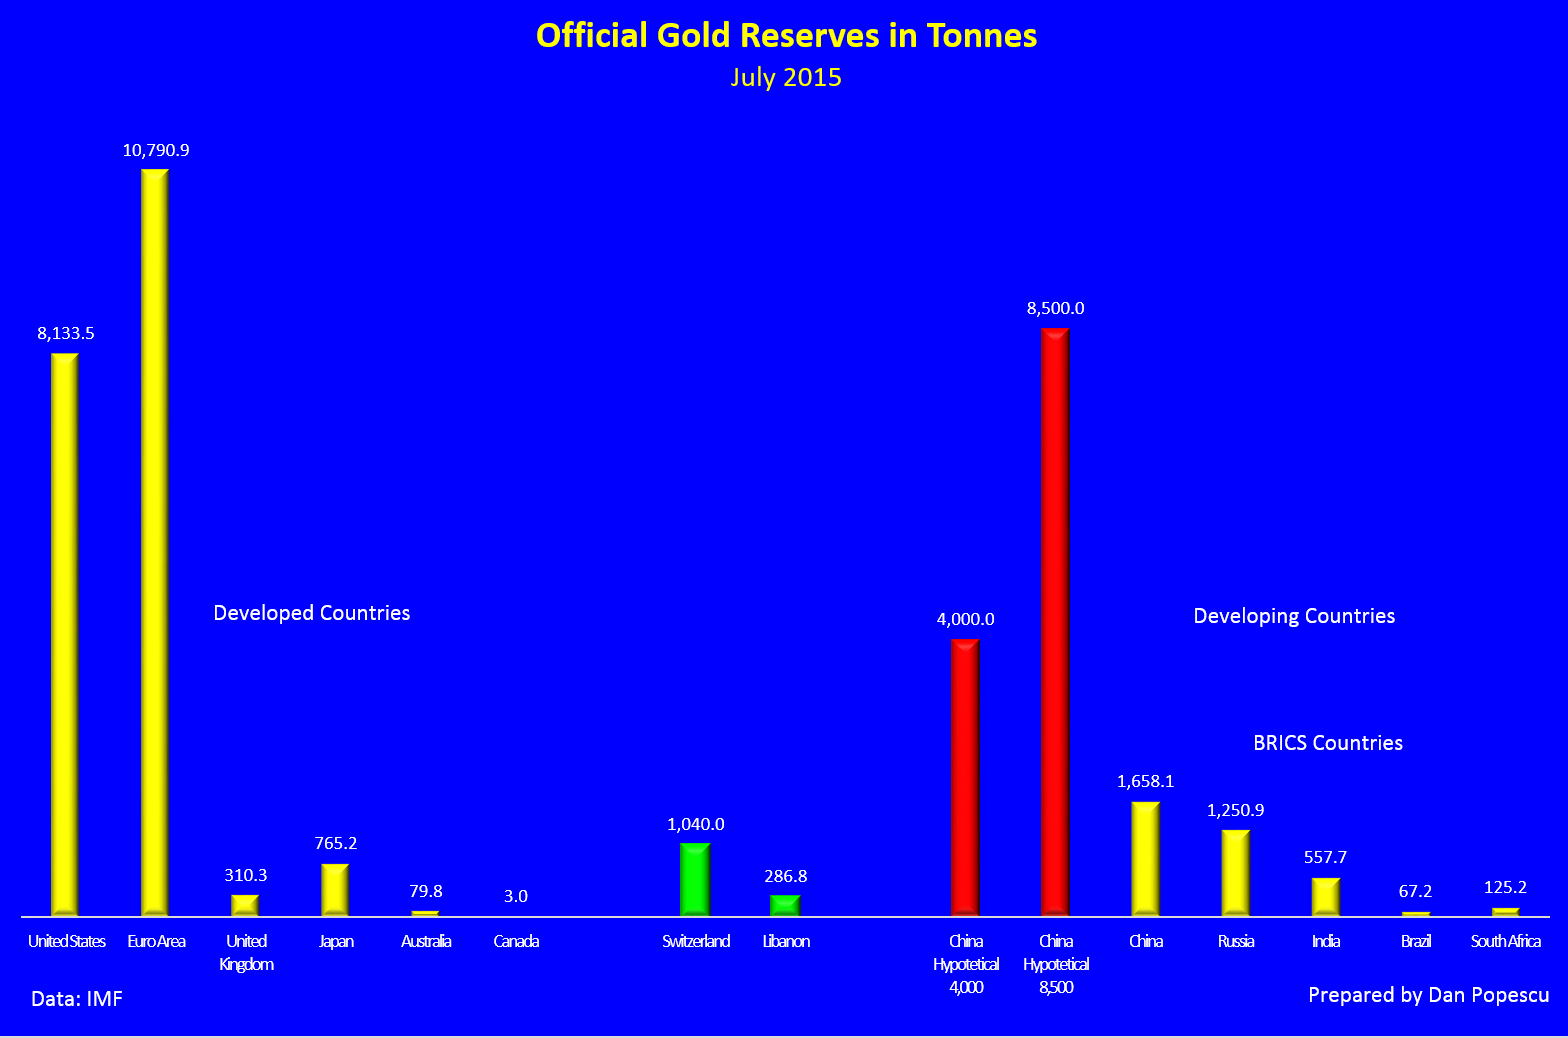 Officials gold reserves in tonnes